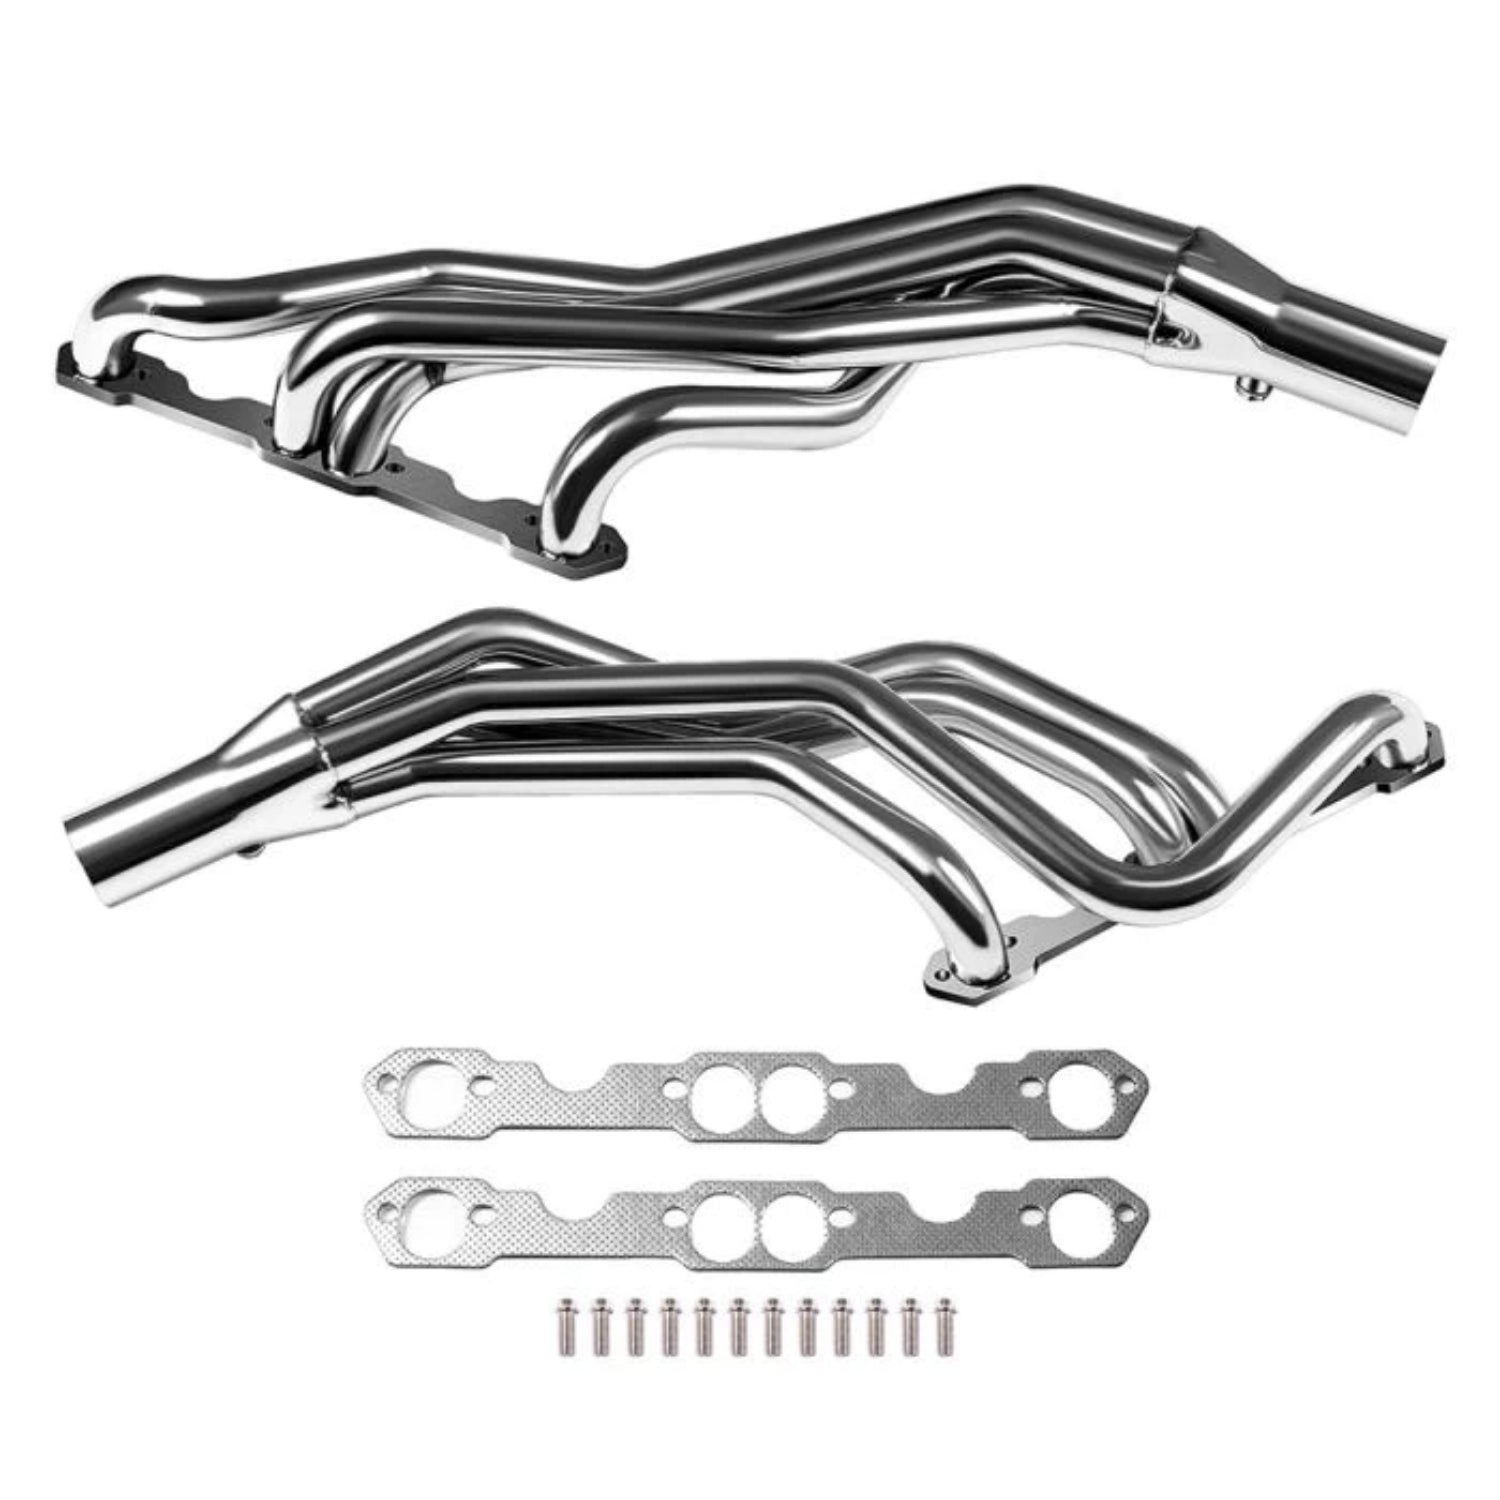 Stainless Exhaust Headers Manifold for 1993-1997 Chevy Camaro/Firebird 5.7L LT1 V8